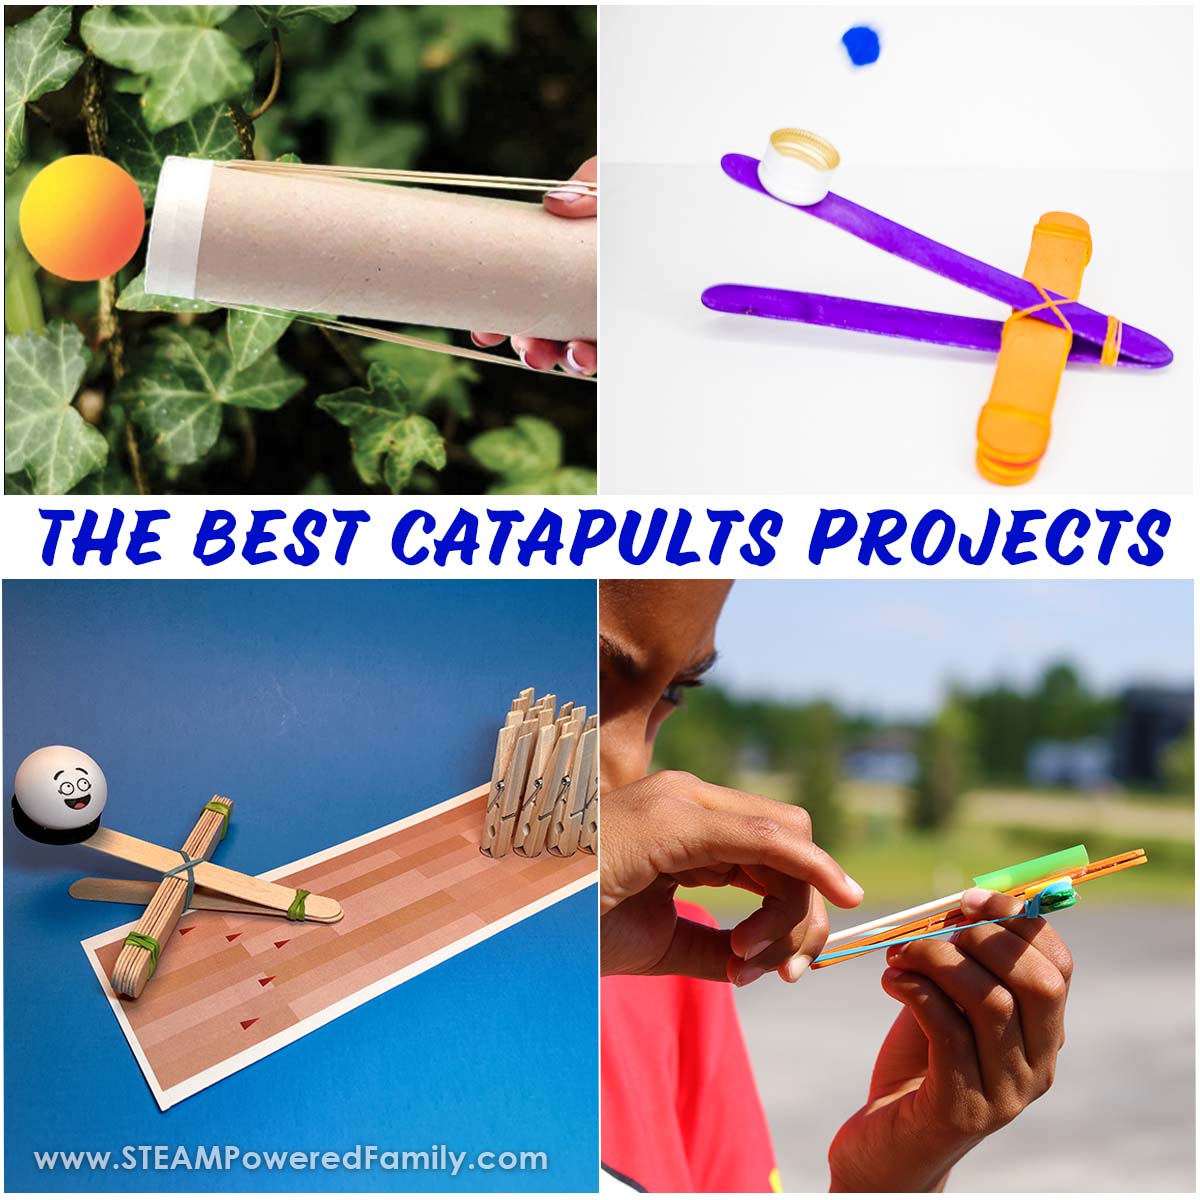 The Best Catapults Projects for Kids